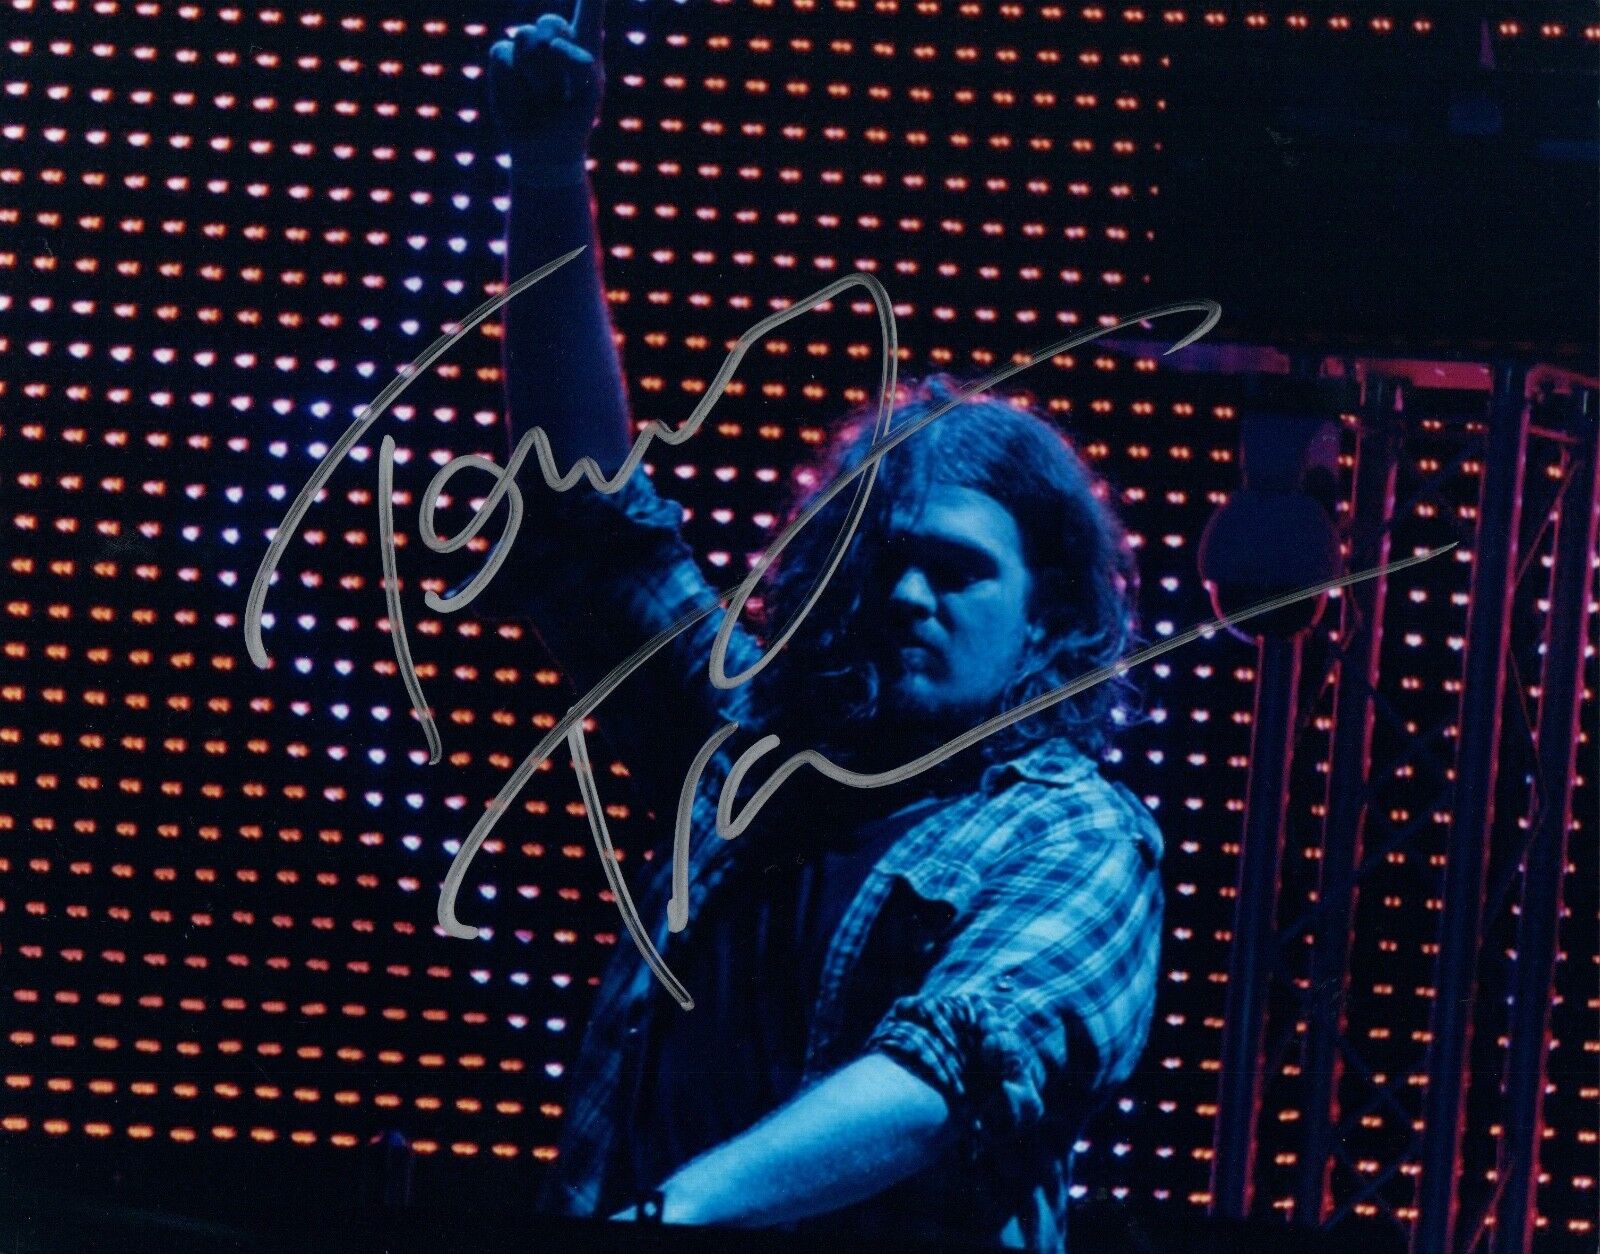 Tommy Trash Signed Autographed 8x10 Photo Poster painting EDM DJ Producer COA VD